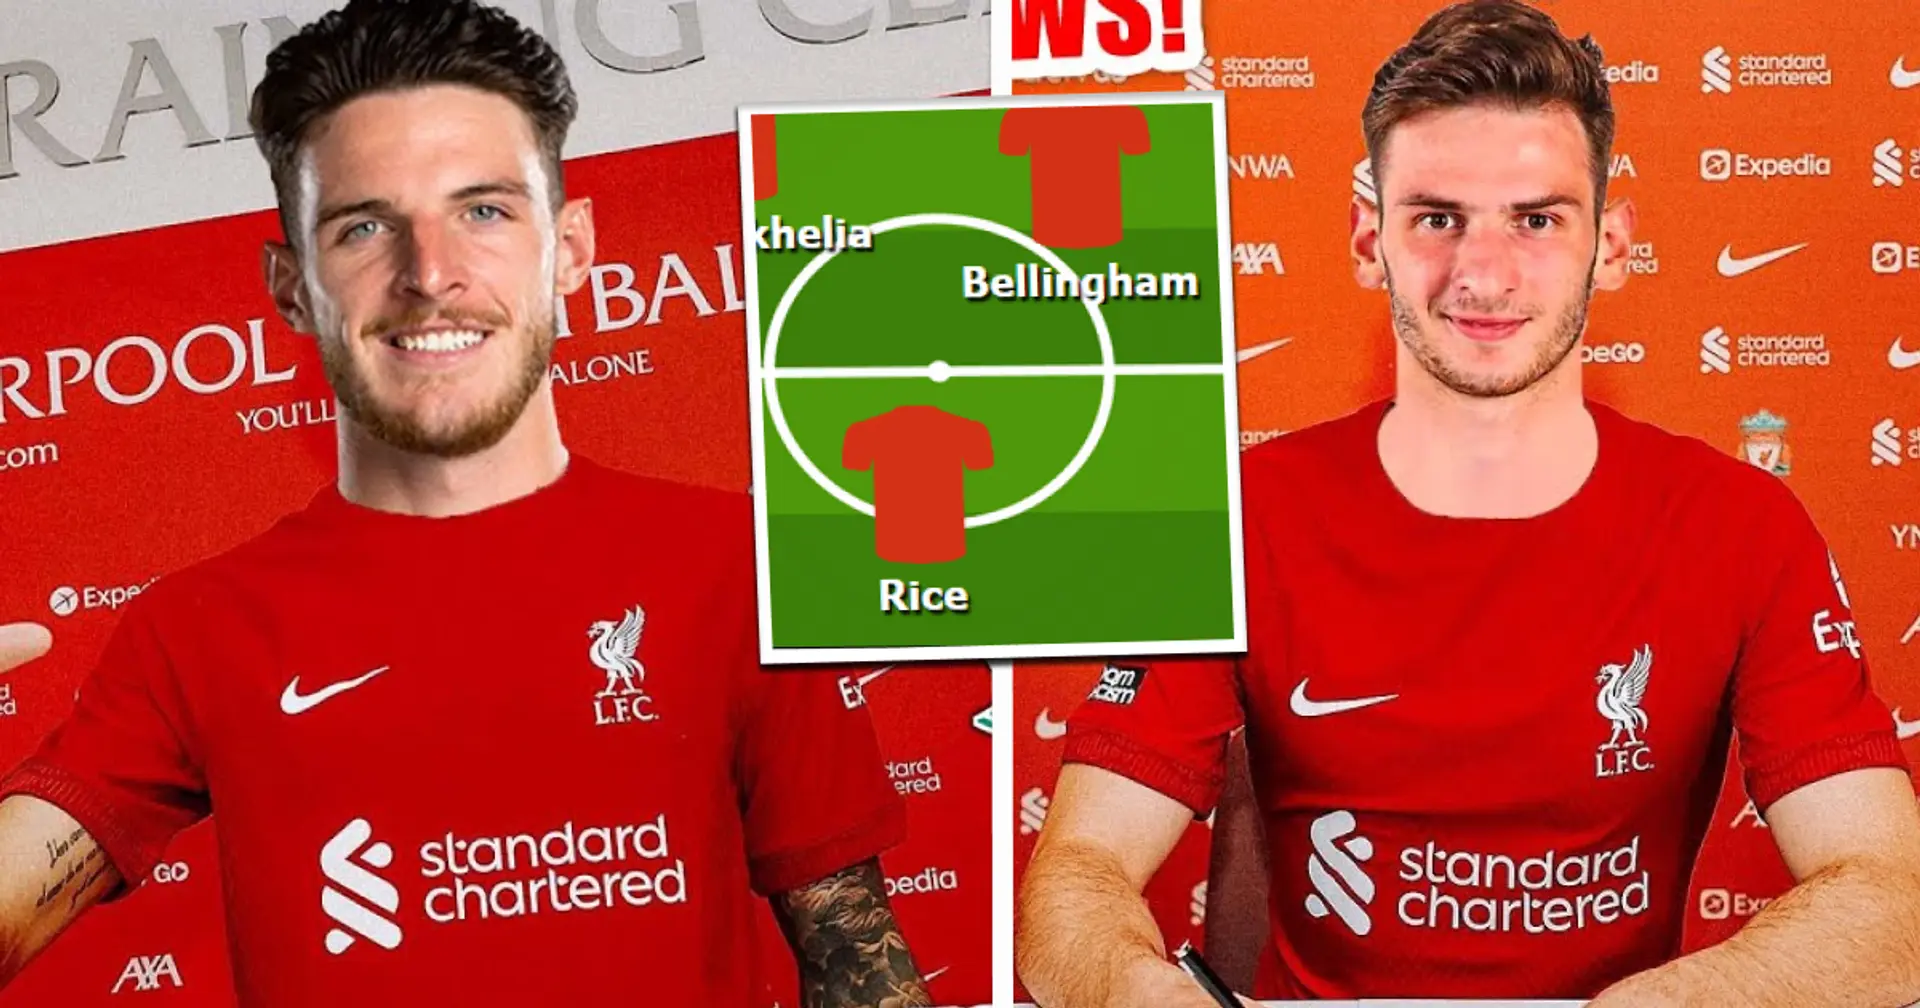 Fan draws insane Liverpool XI with 5 world-class signings - only it's as possible as alien landing